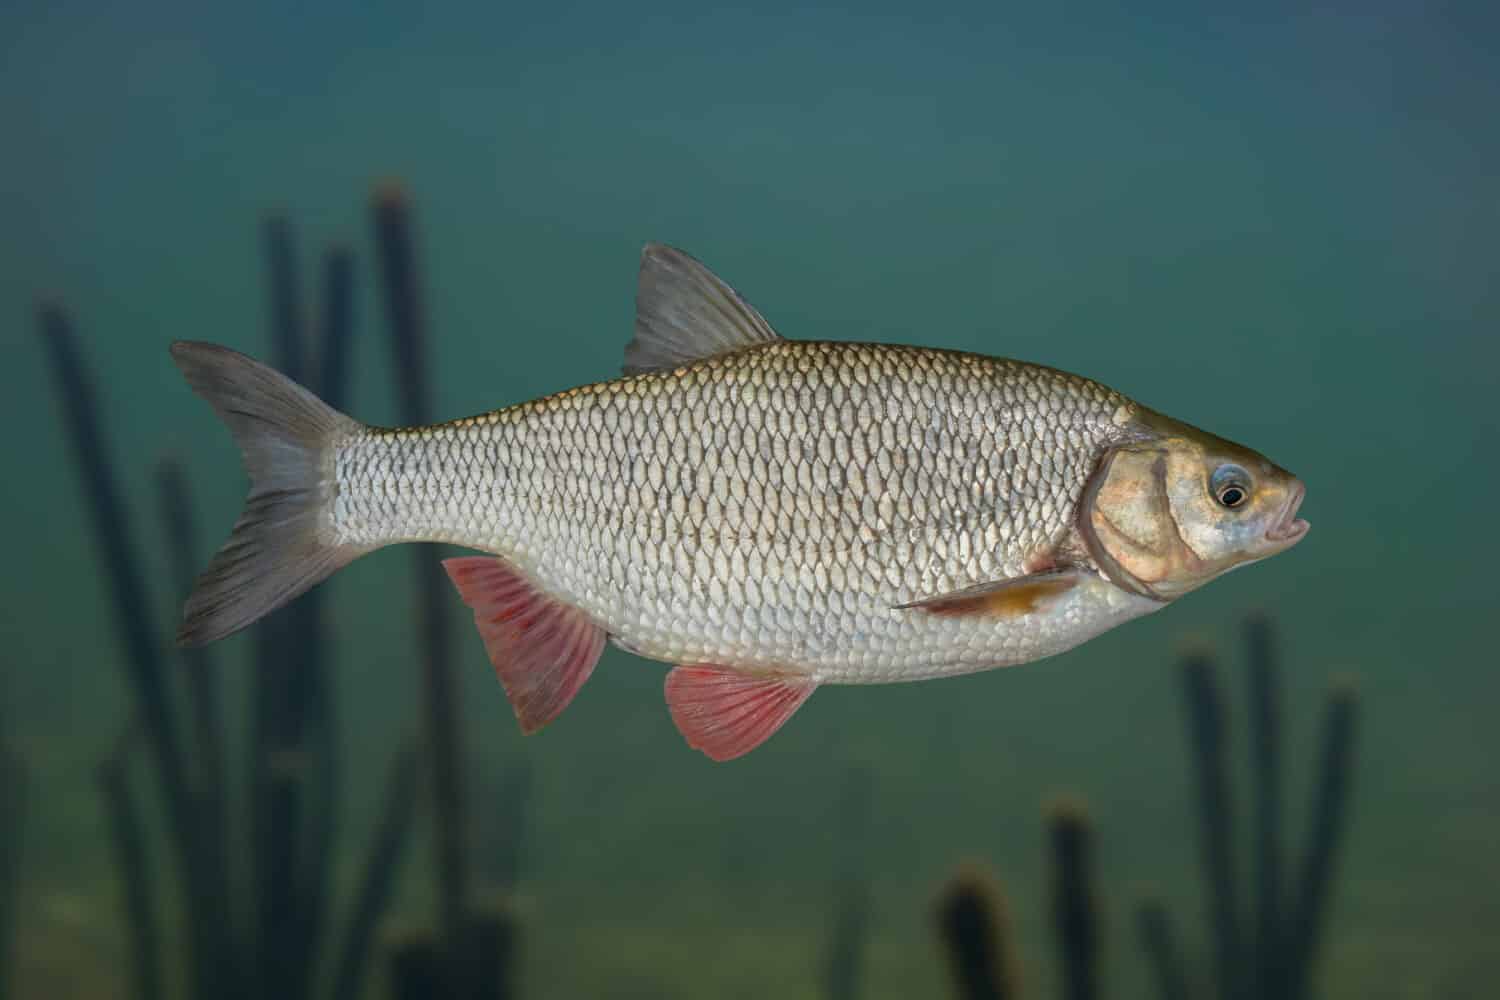 Ide fish isolated on natural underwater background